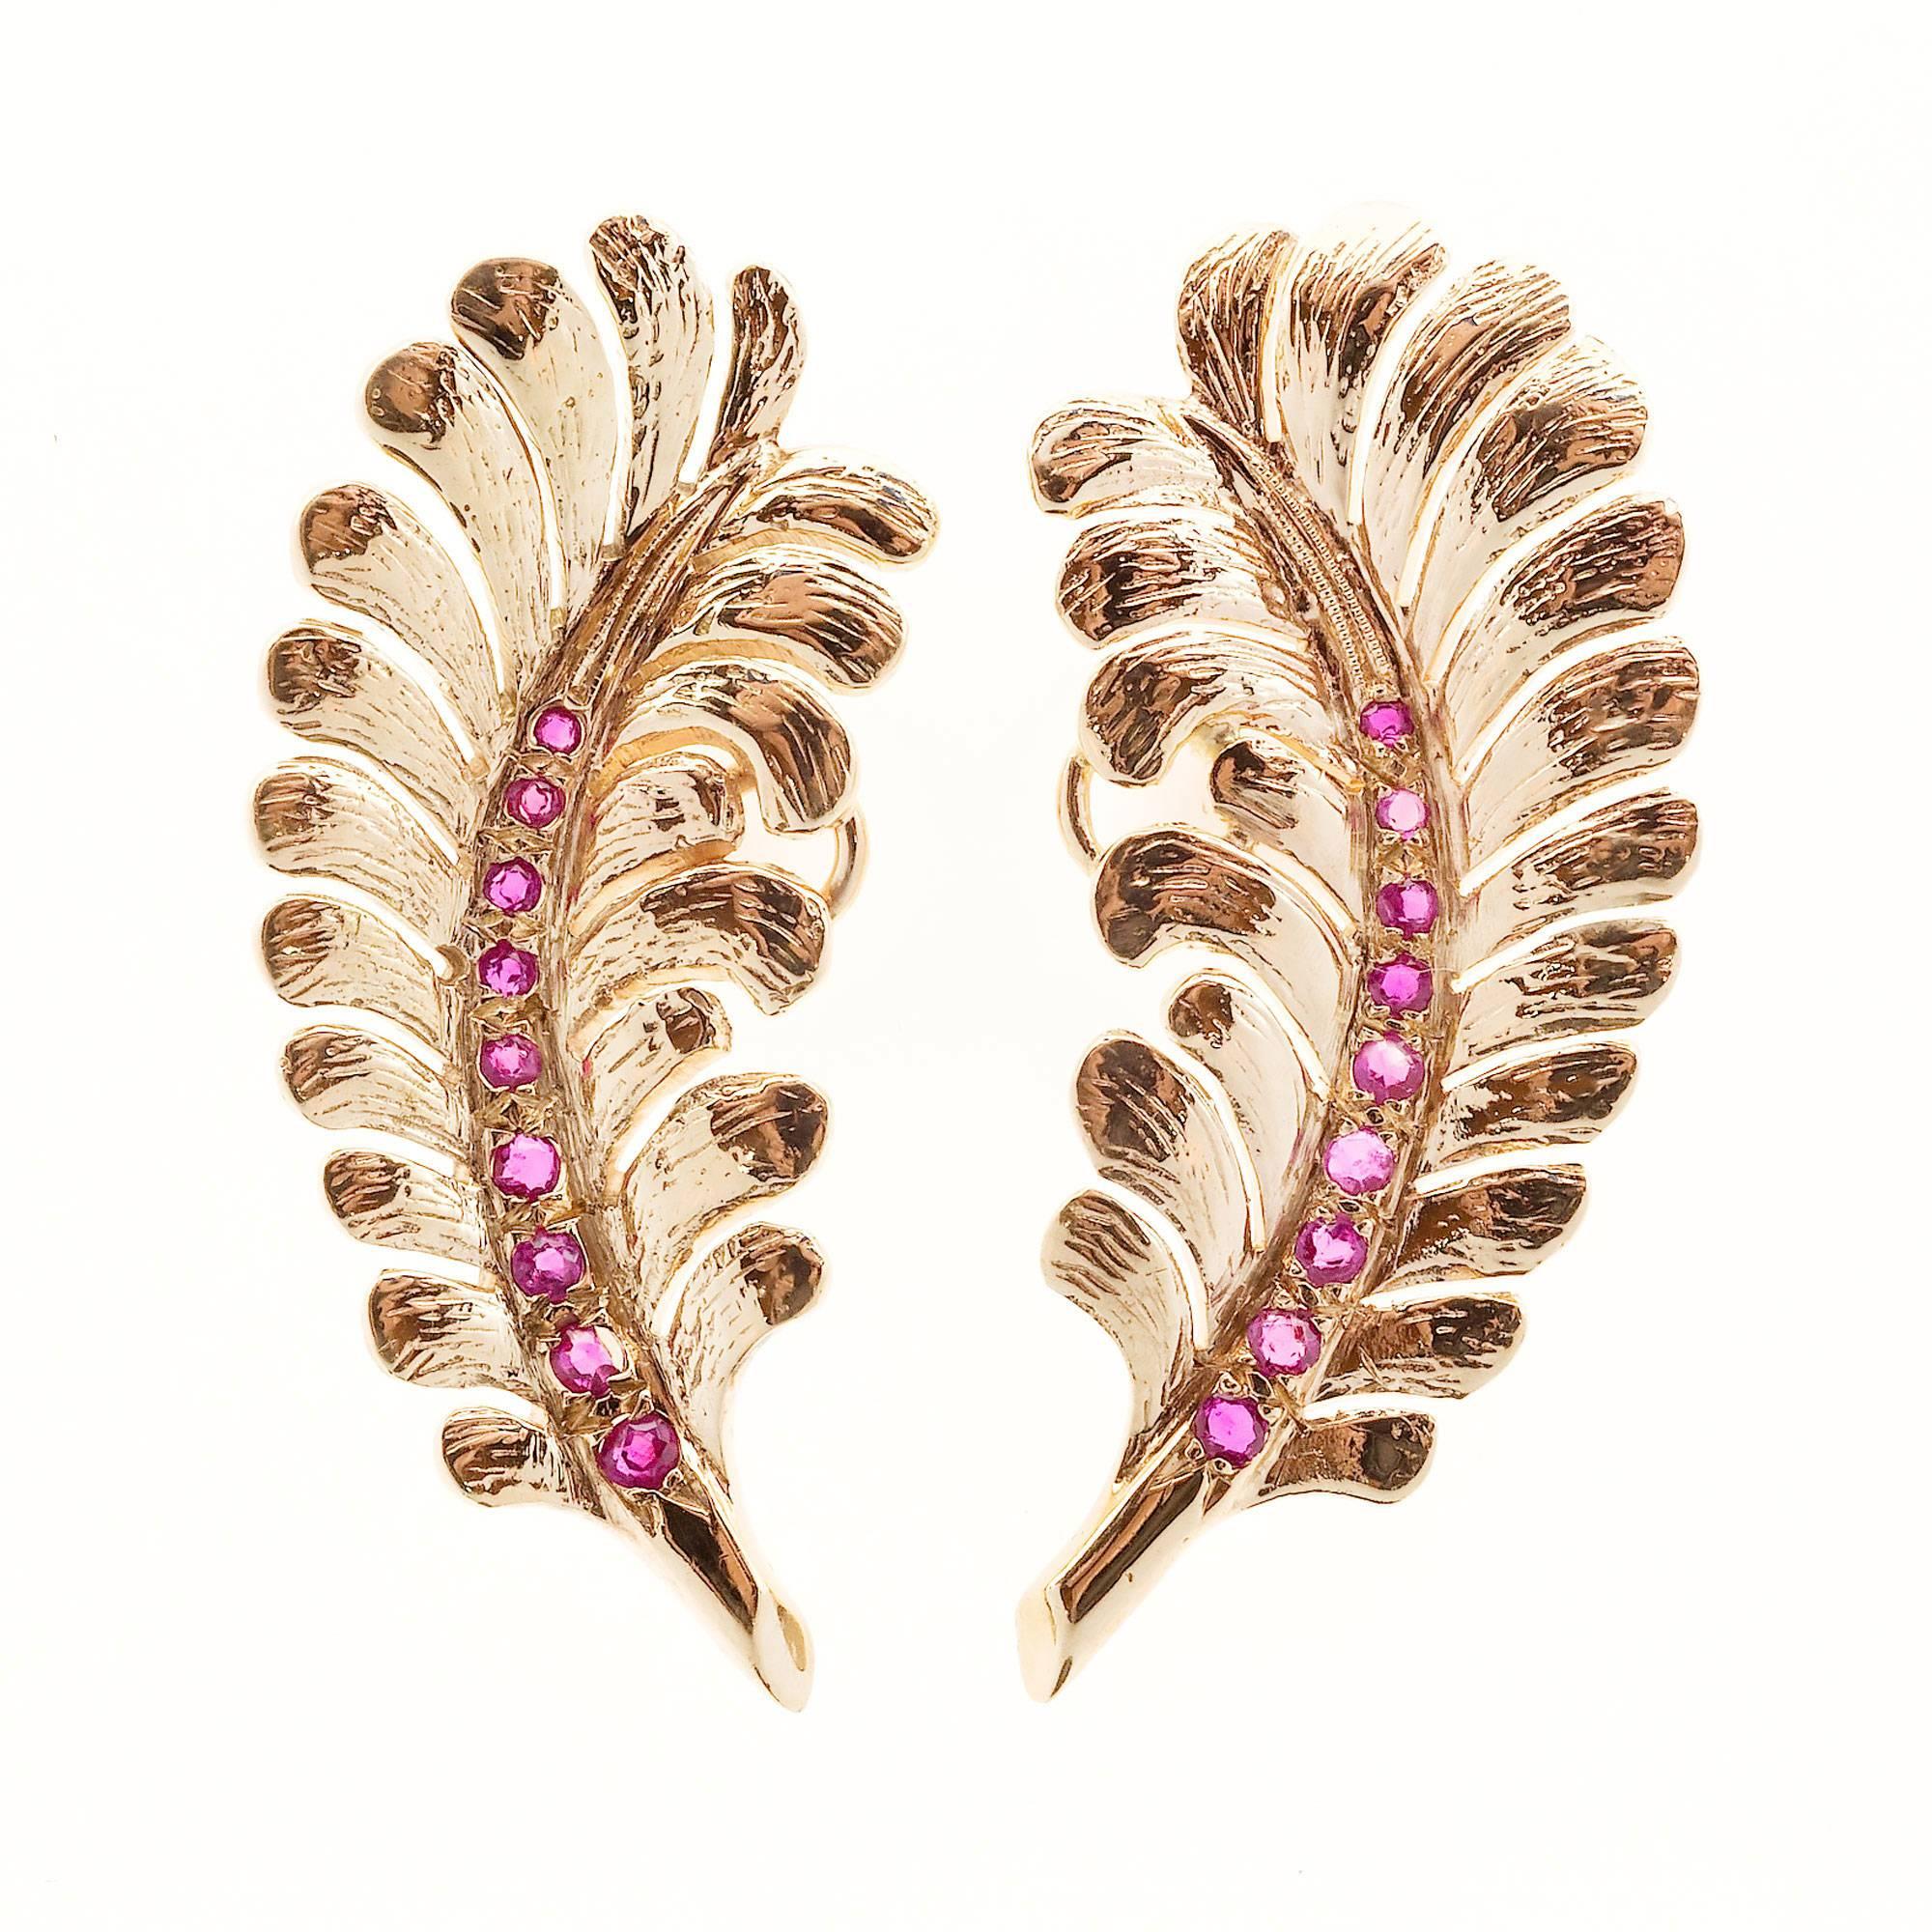 Authentic Tiffany & Co. 1950 to 1960 feather design earrings with left and right designs set with beautiful bright red Rubies. Excellent condition. Looks great on the ear.

18 natural genuine bright red Rubies, approx. total weight .22cts, VS
Top